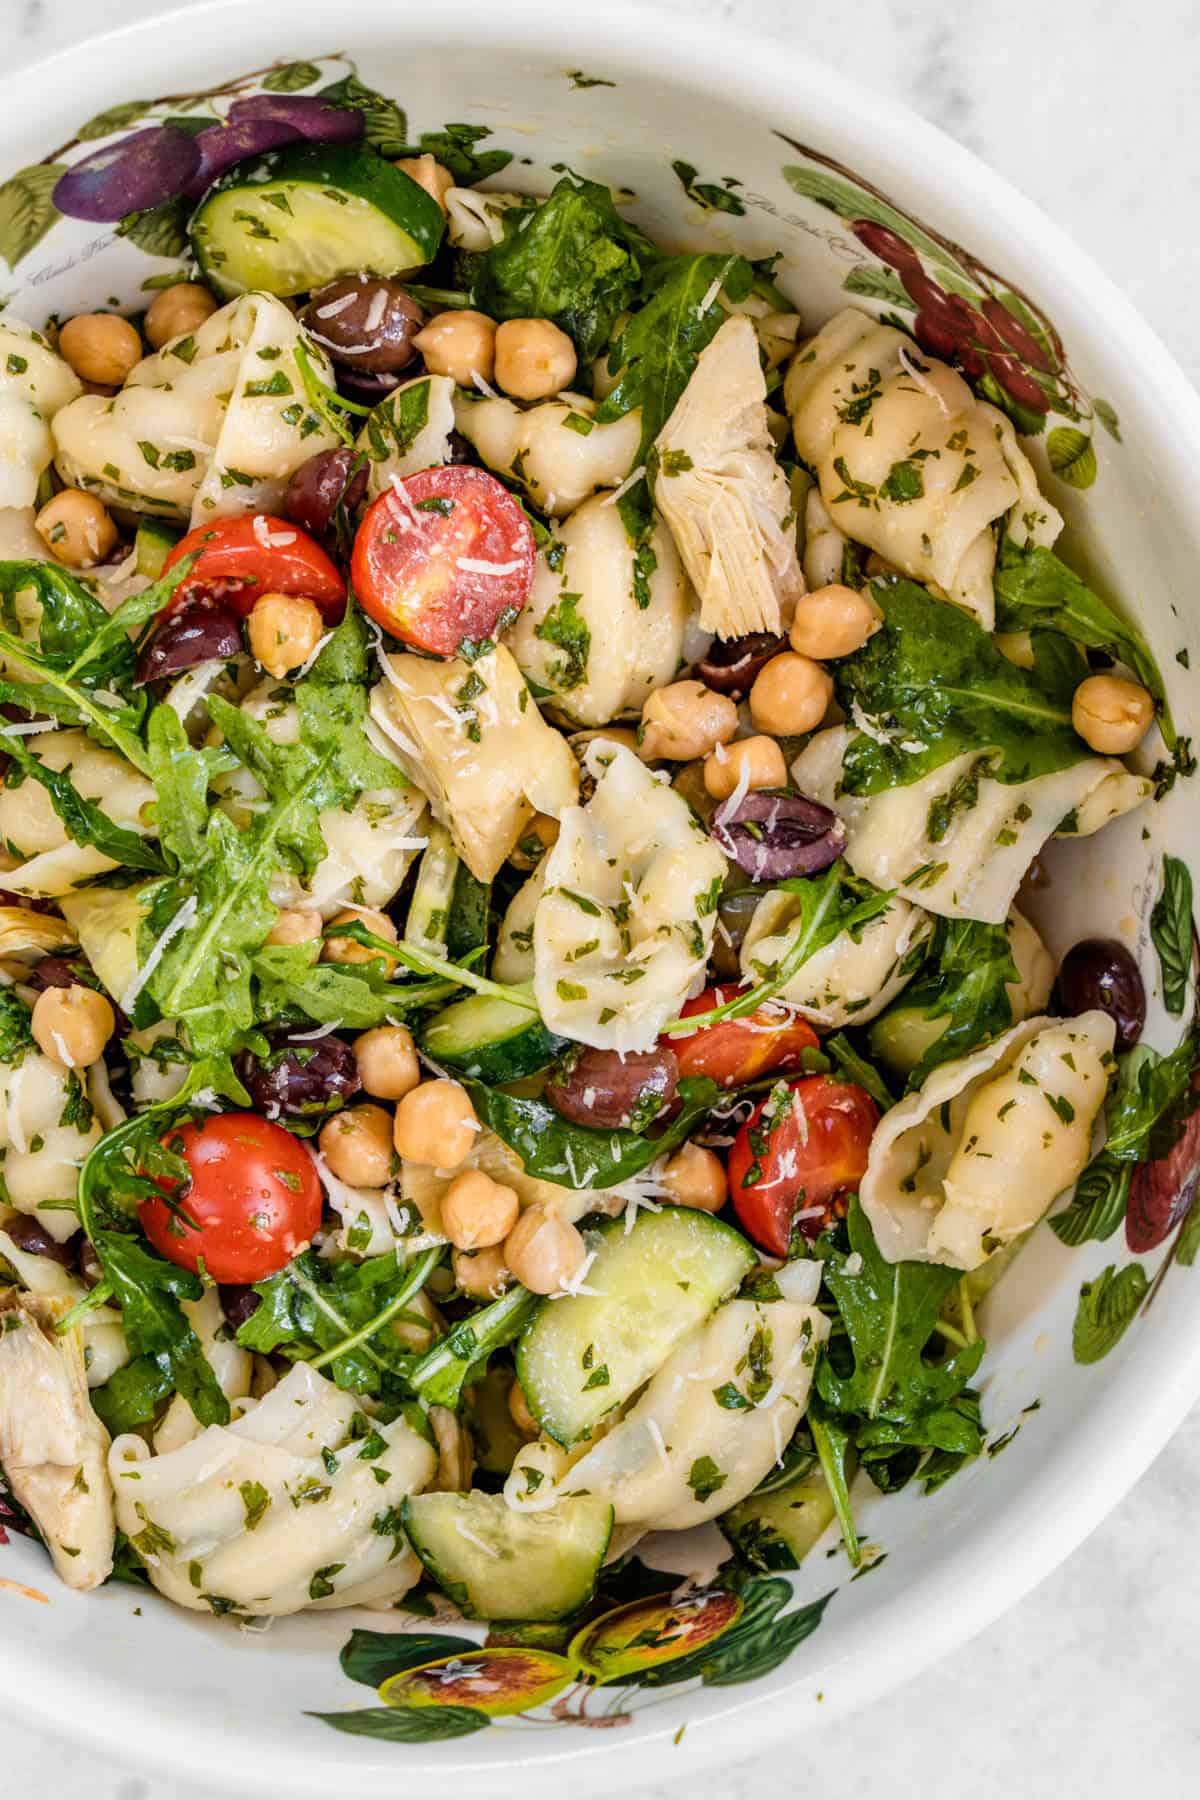 Pasta salad with chickpeas and Italian dressing